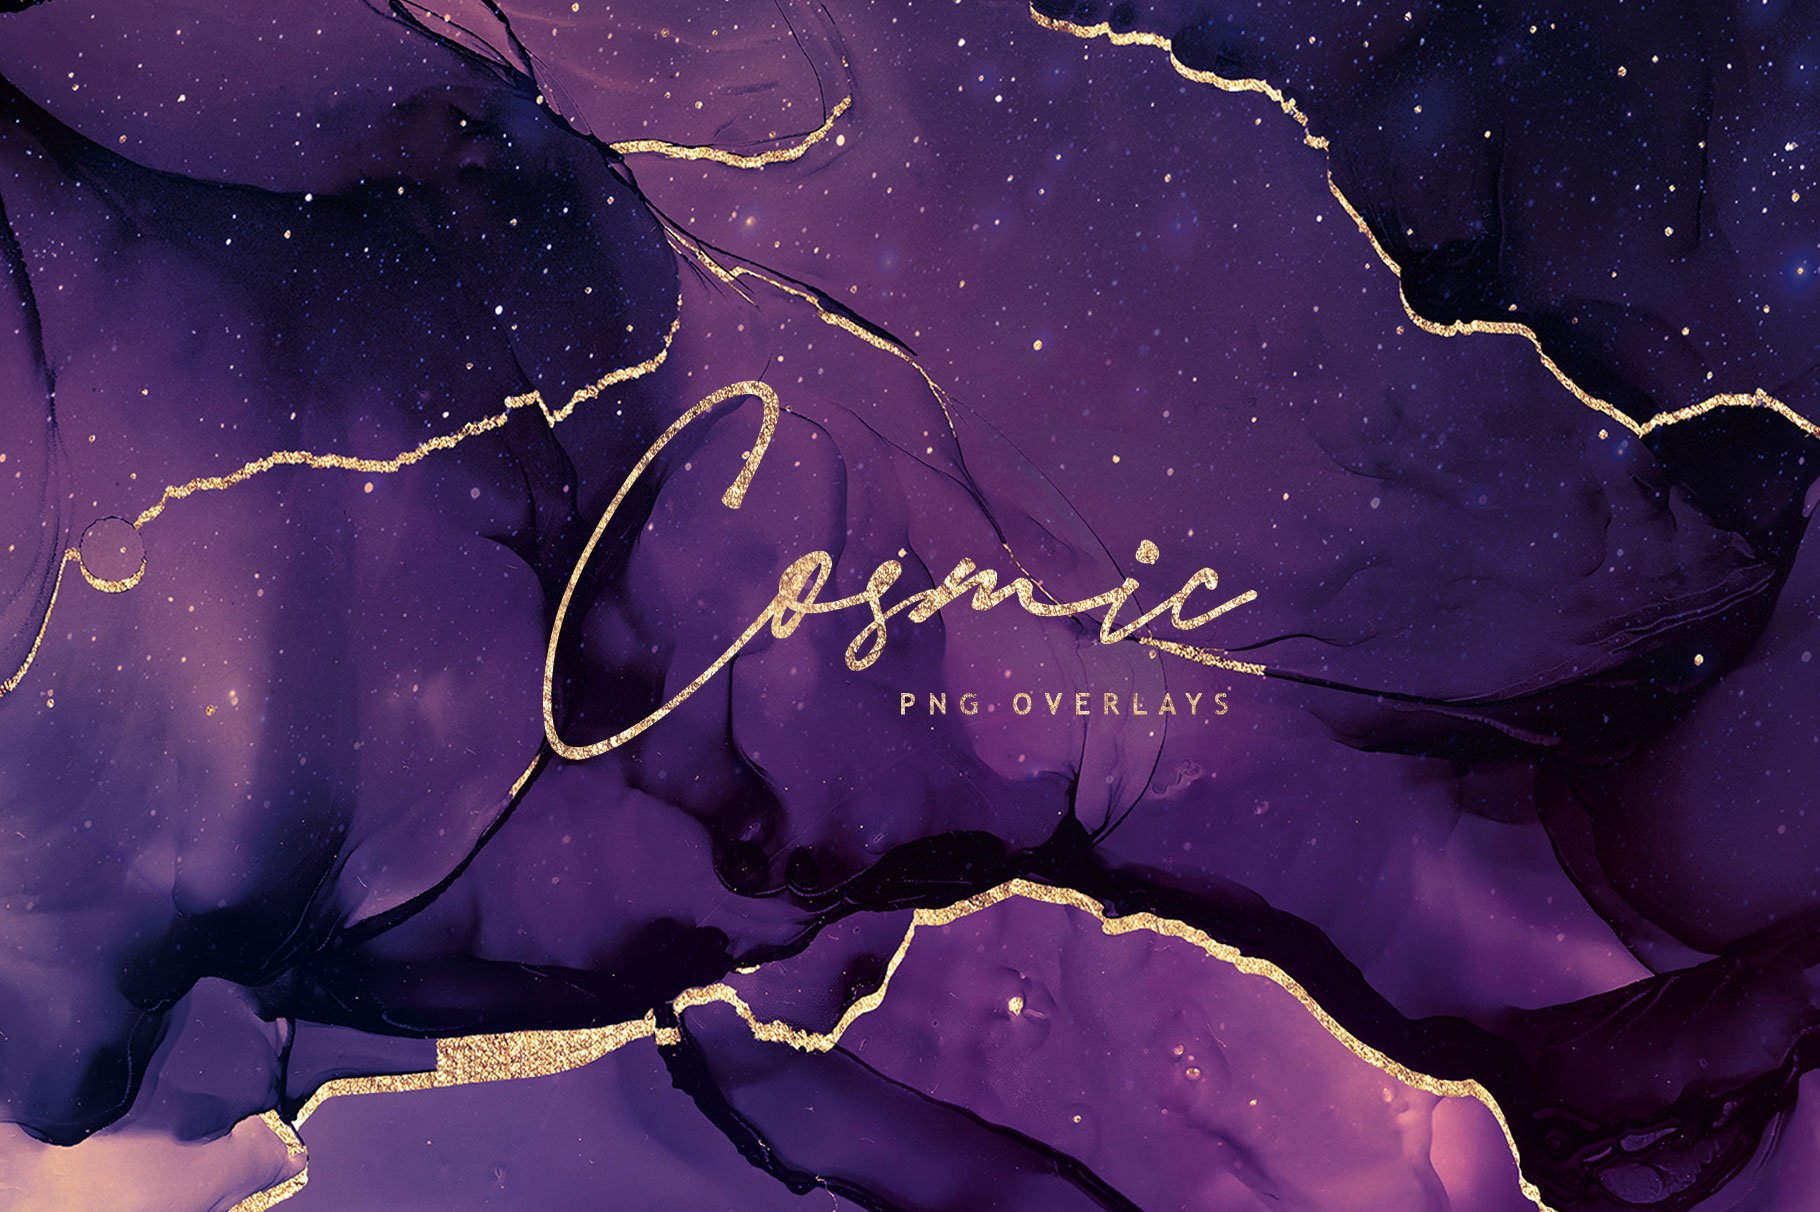 Galaxy & Cosmic (Png) Overlays cover image.